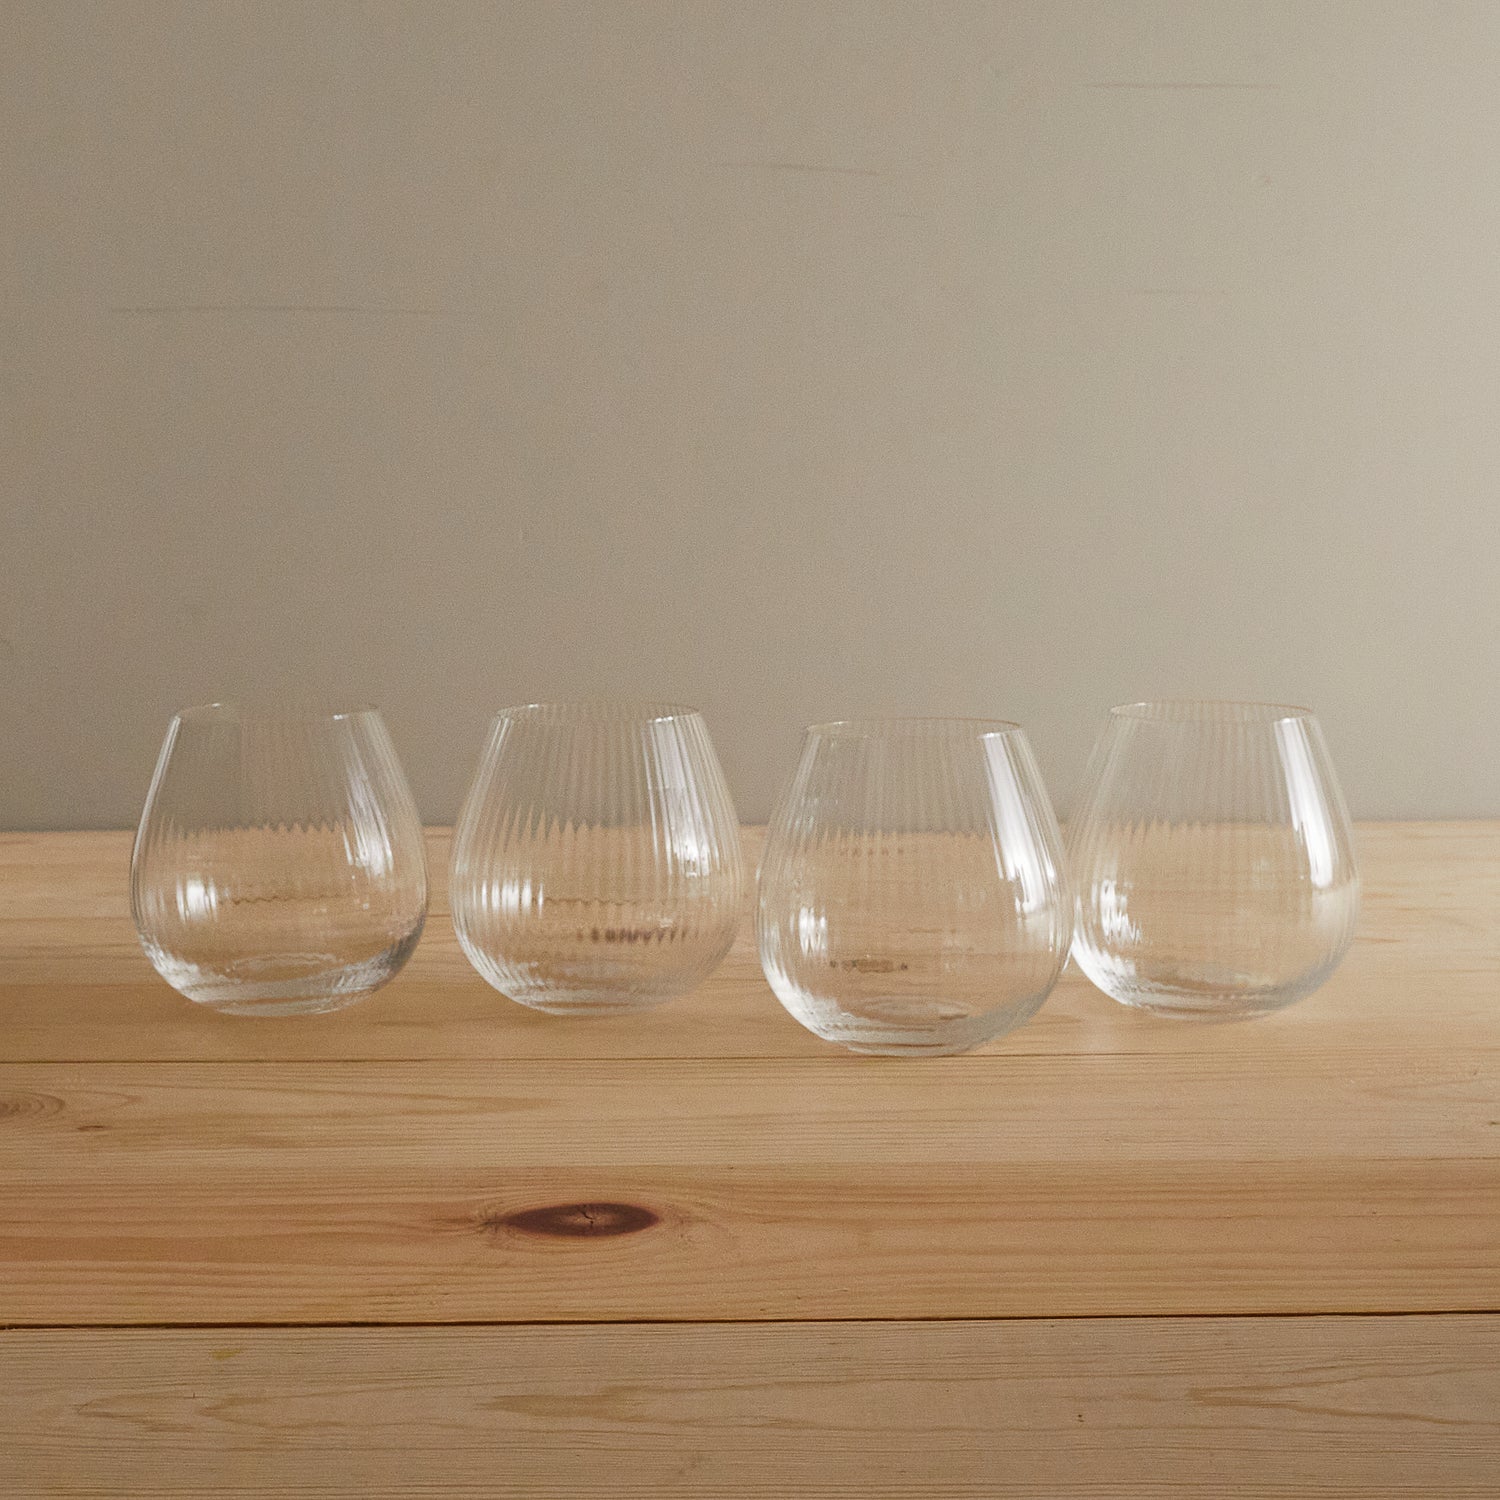 5 Stemless Drinking Glasses for Your Chic Home Bar